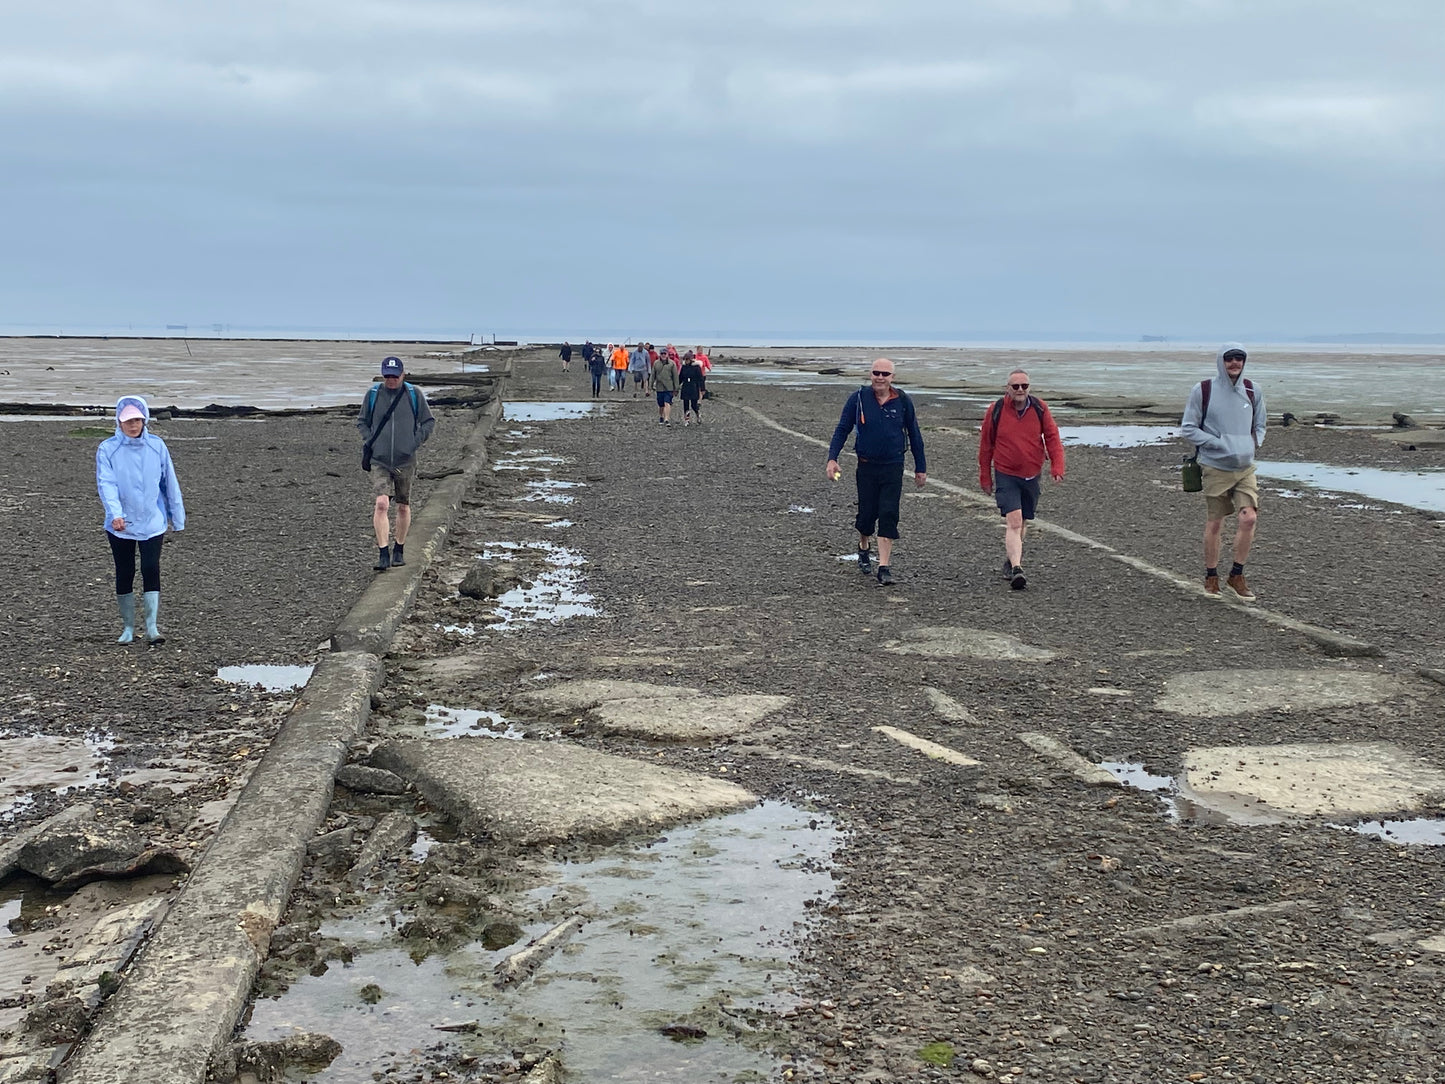 Broomway (Long) guided walk. (7 miles, 4 hours). Please read description.